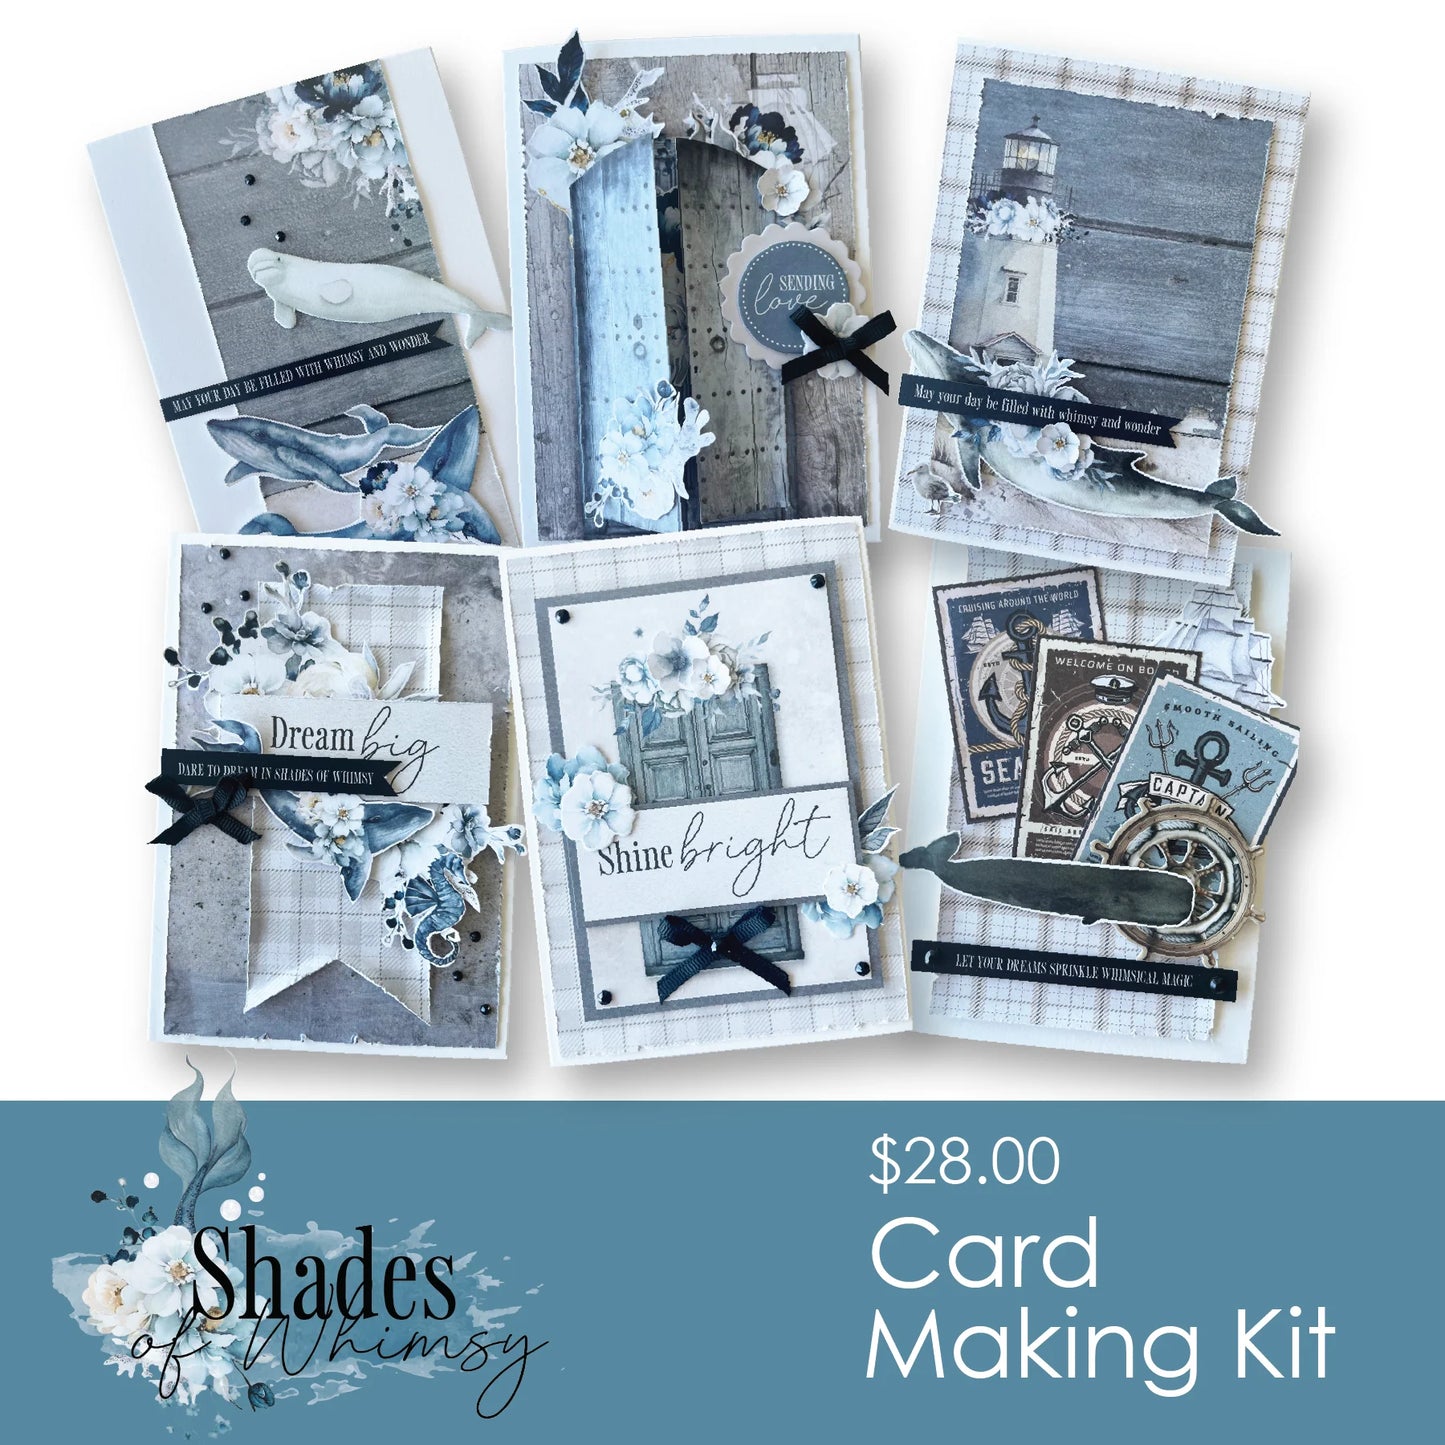 Uniquely Creative Card Making Kit- Shades of Whimsy